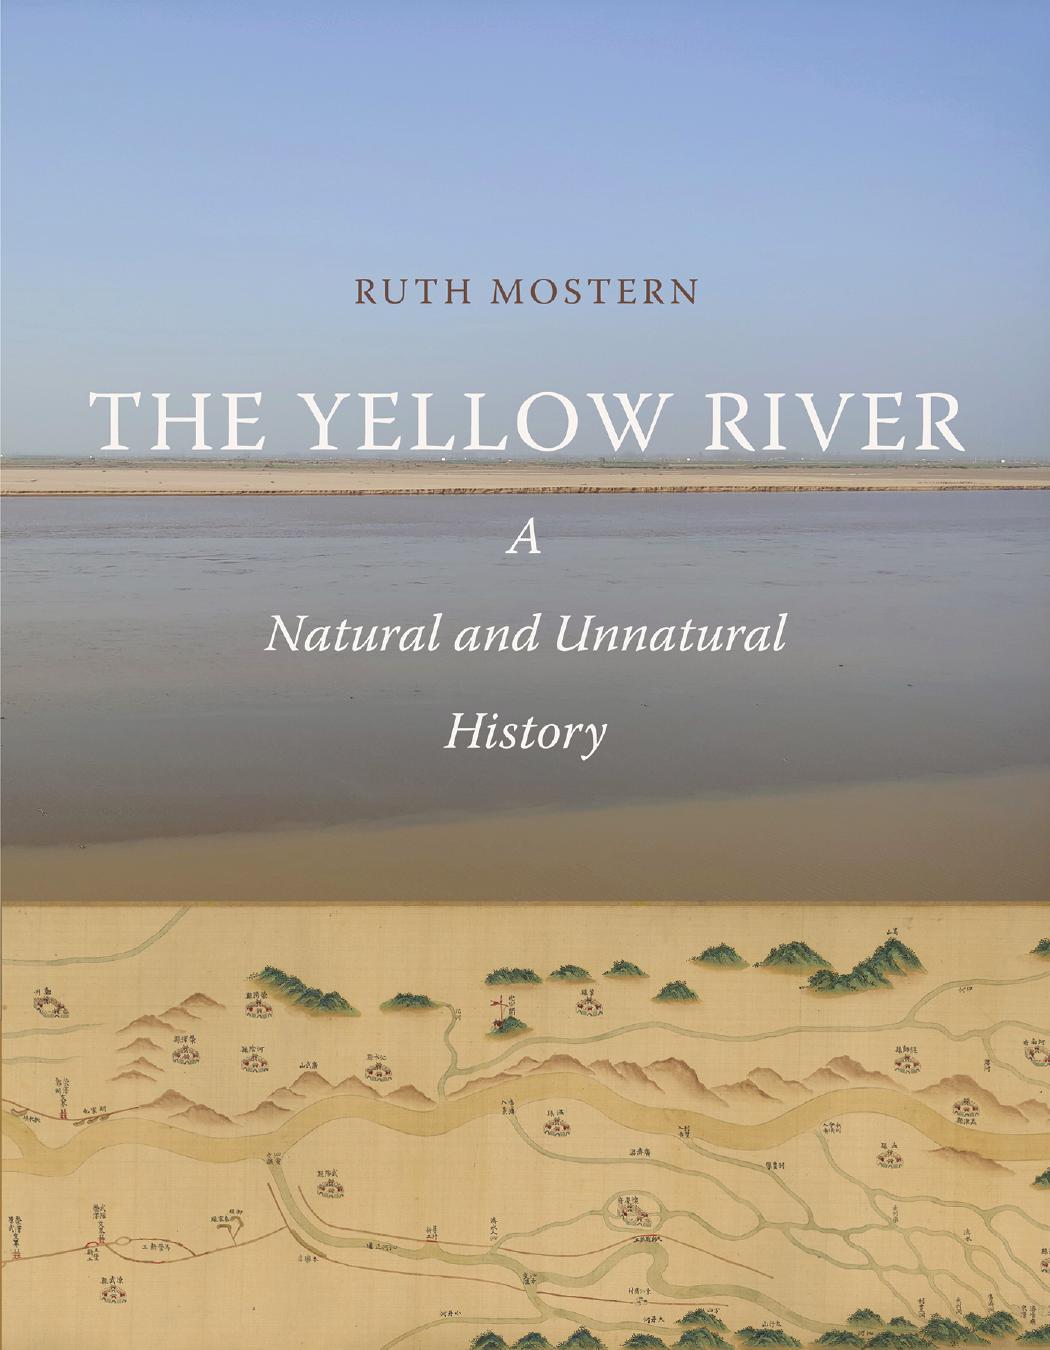 The Yellow River by Ruth Mostern